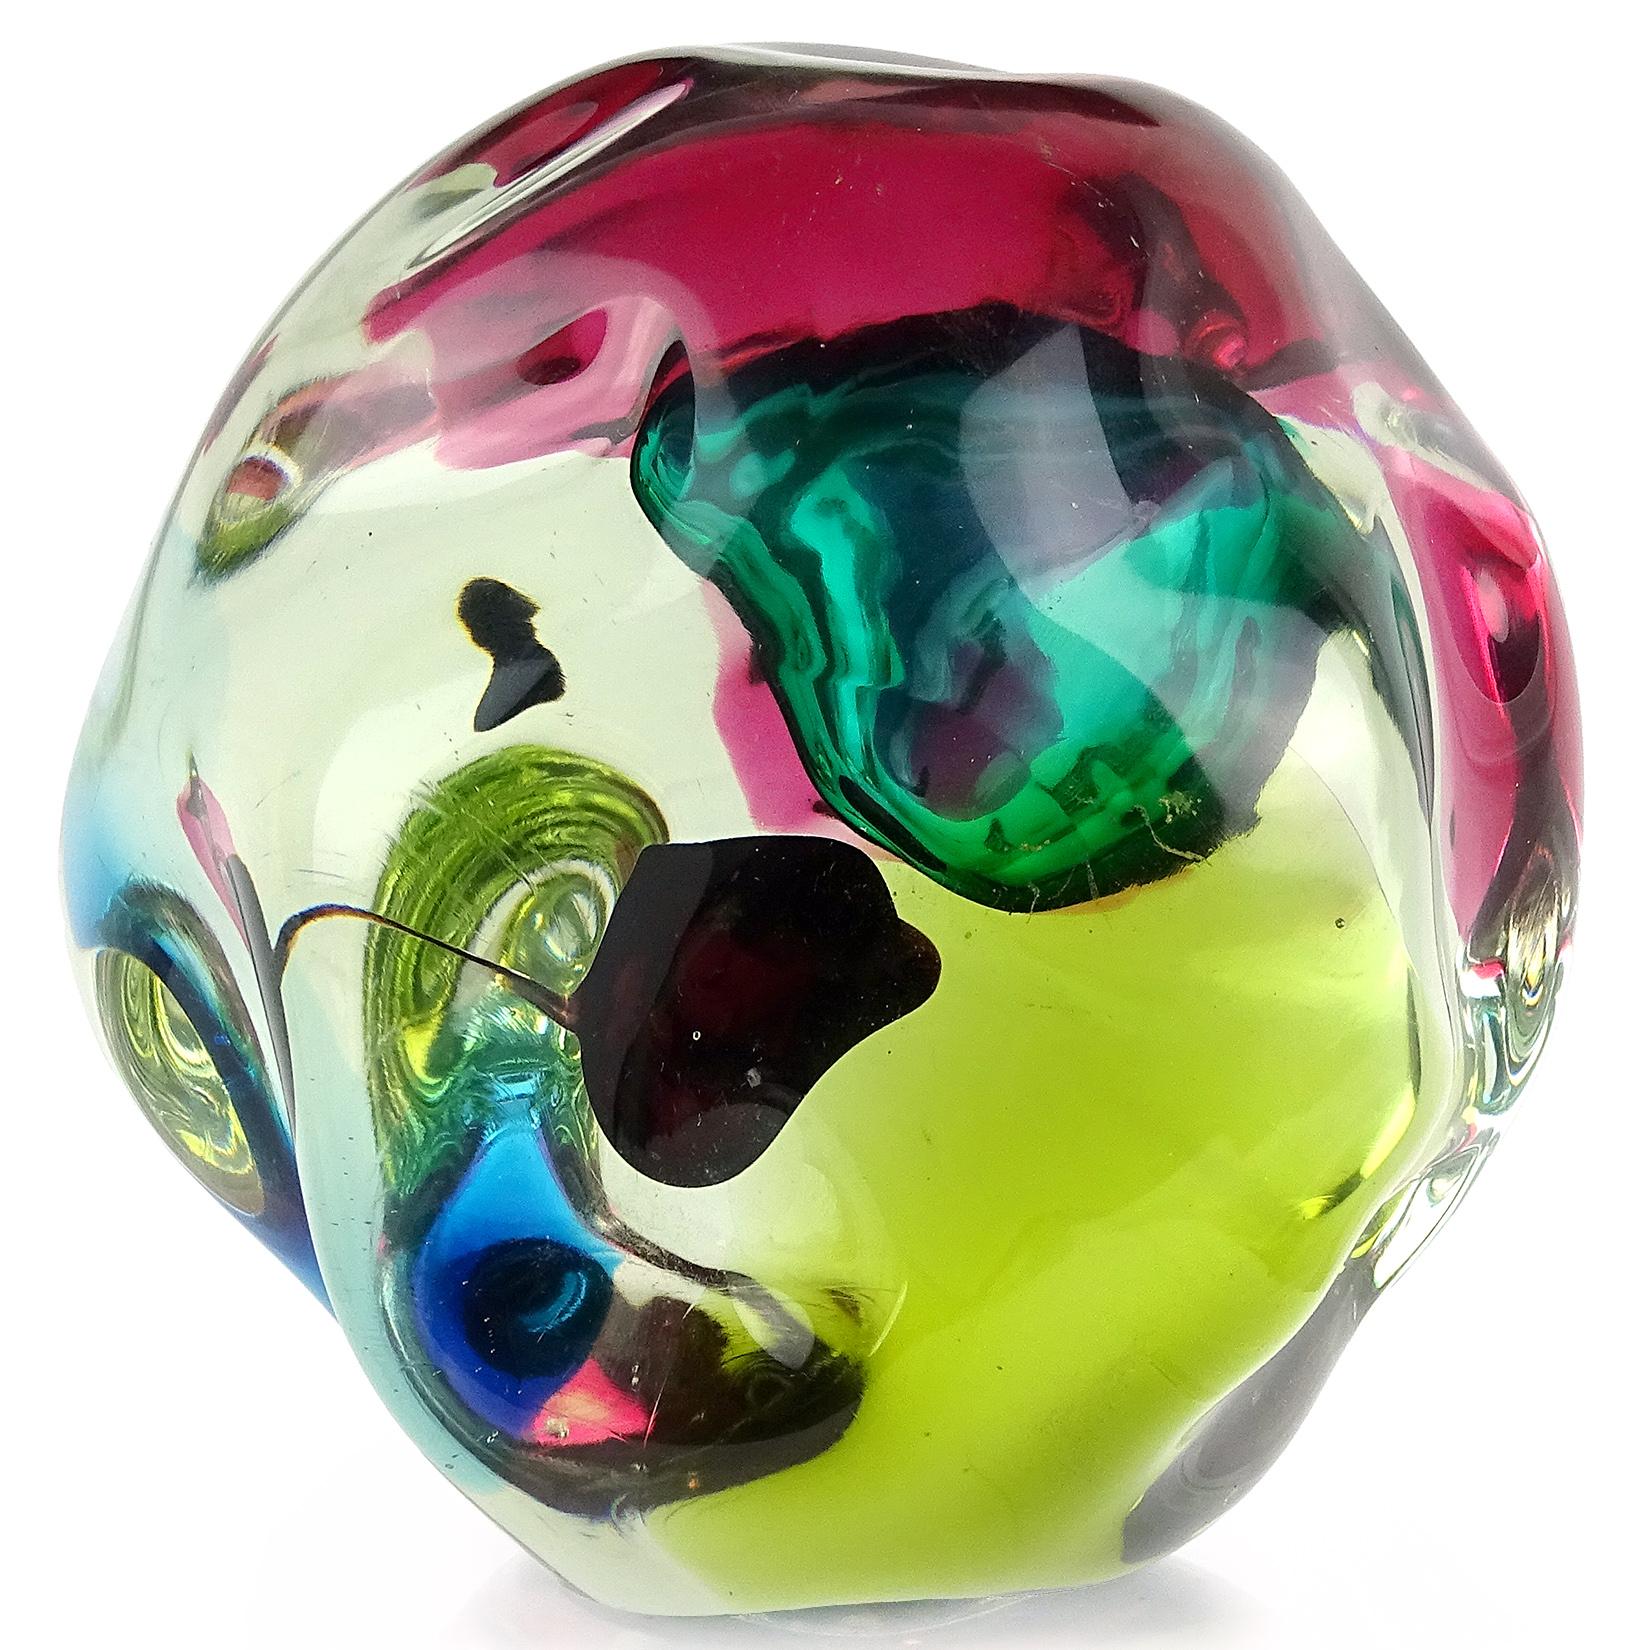 Gorgeous large Murano hand blown Sommerso multi-color Italian art glass biomorphic rock shaped sculpture. Documented to the Salviati Company, and attributed to designer Luciano Gaspari. The abstract form and decoration make the piece look different